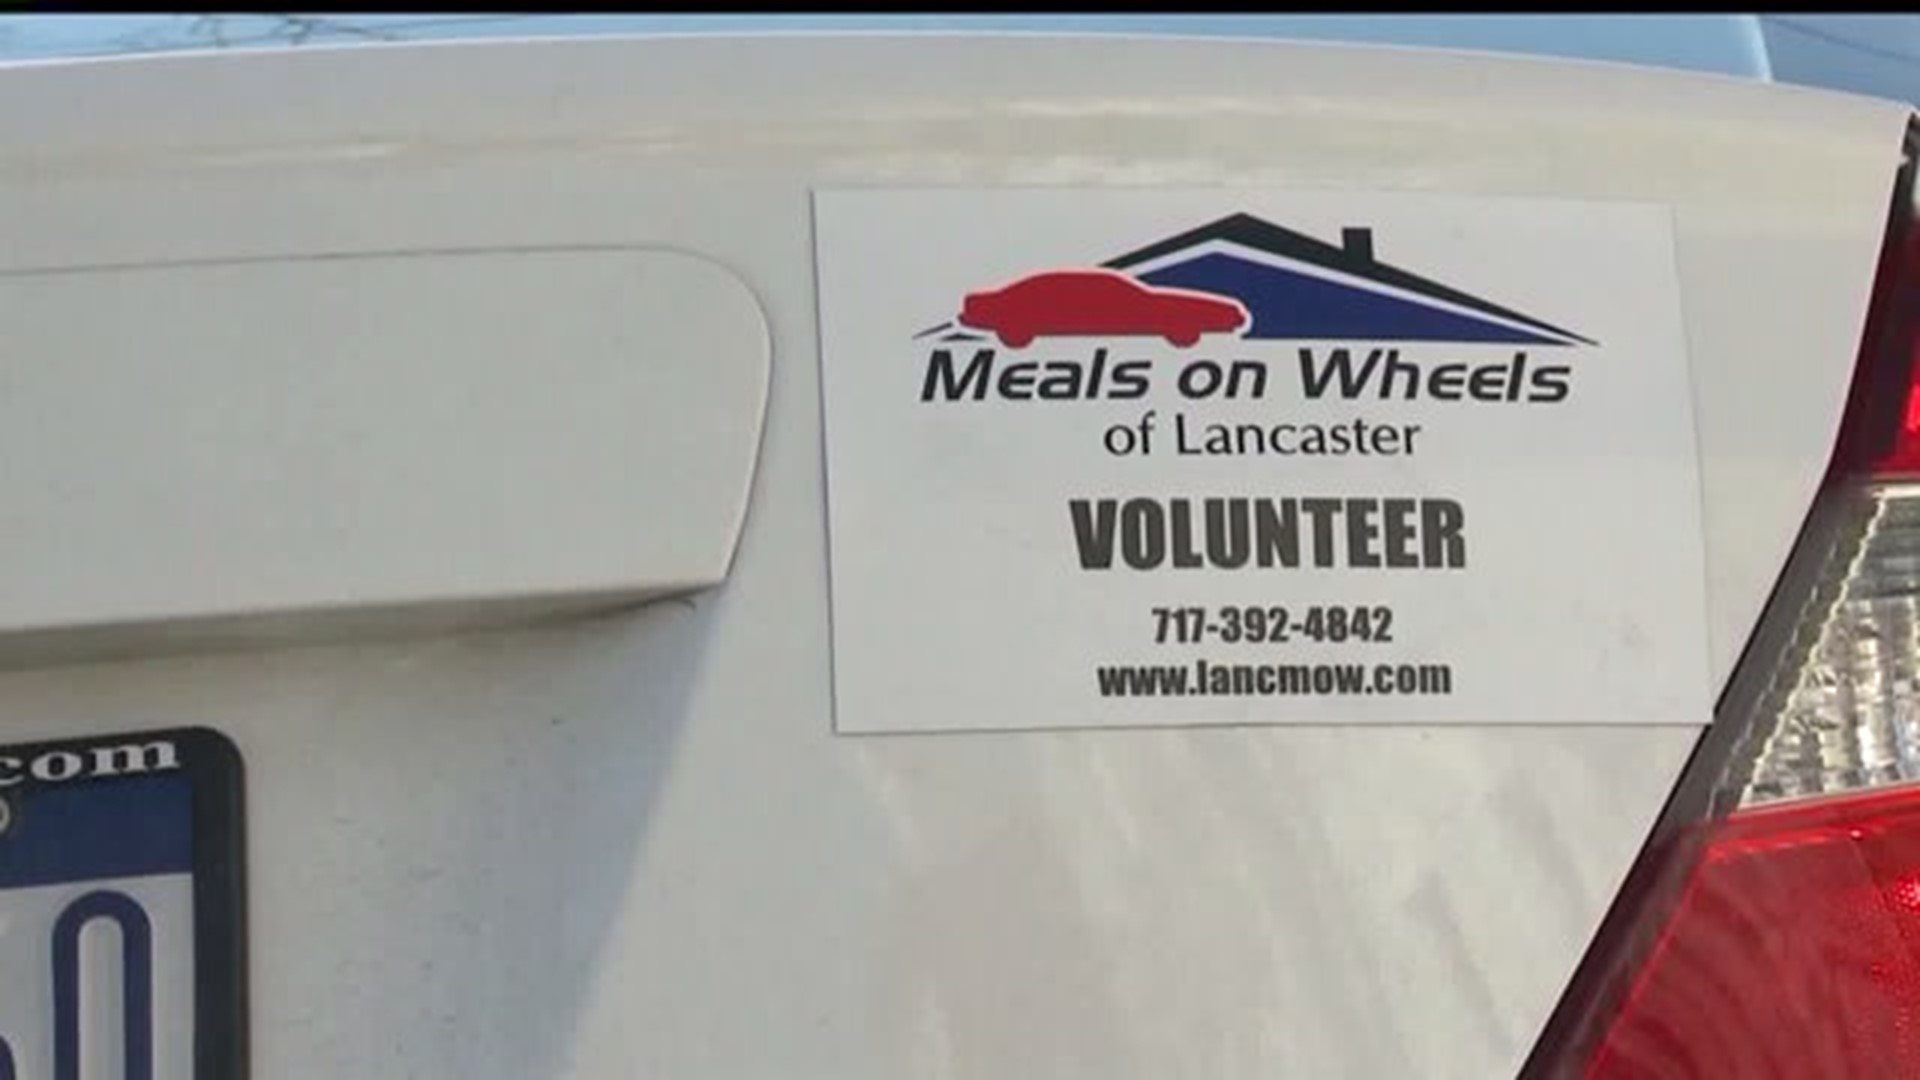 Meals on Wheels makes special delivery in Lancaster return